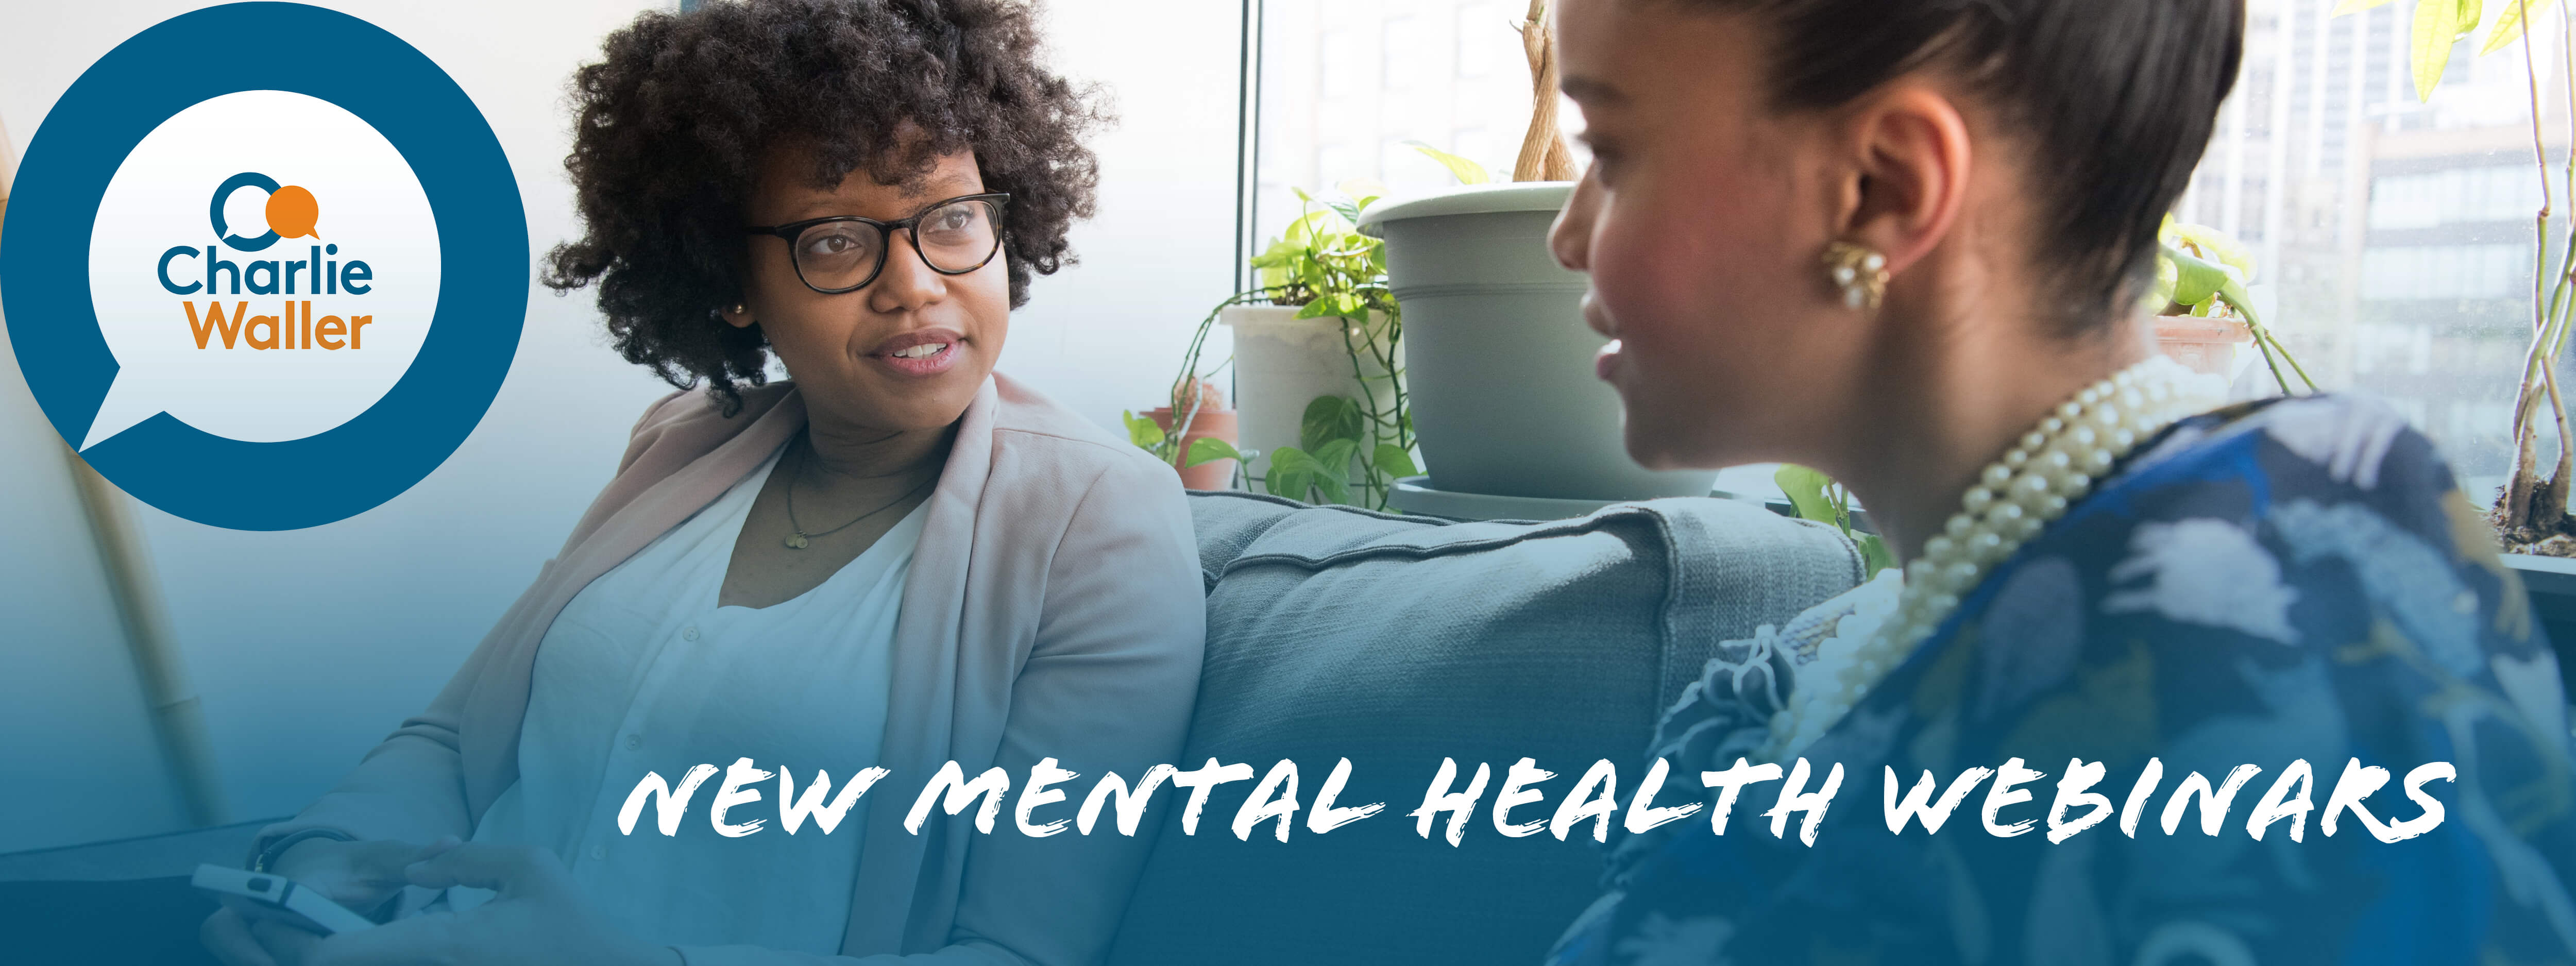 A black woman with curly black hair and glasses talking with a younger black woman sitting on a couch. There is white text which says new mental health webinars and has Charlie Waller Trust logo in the left hand corner. 